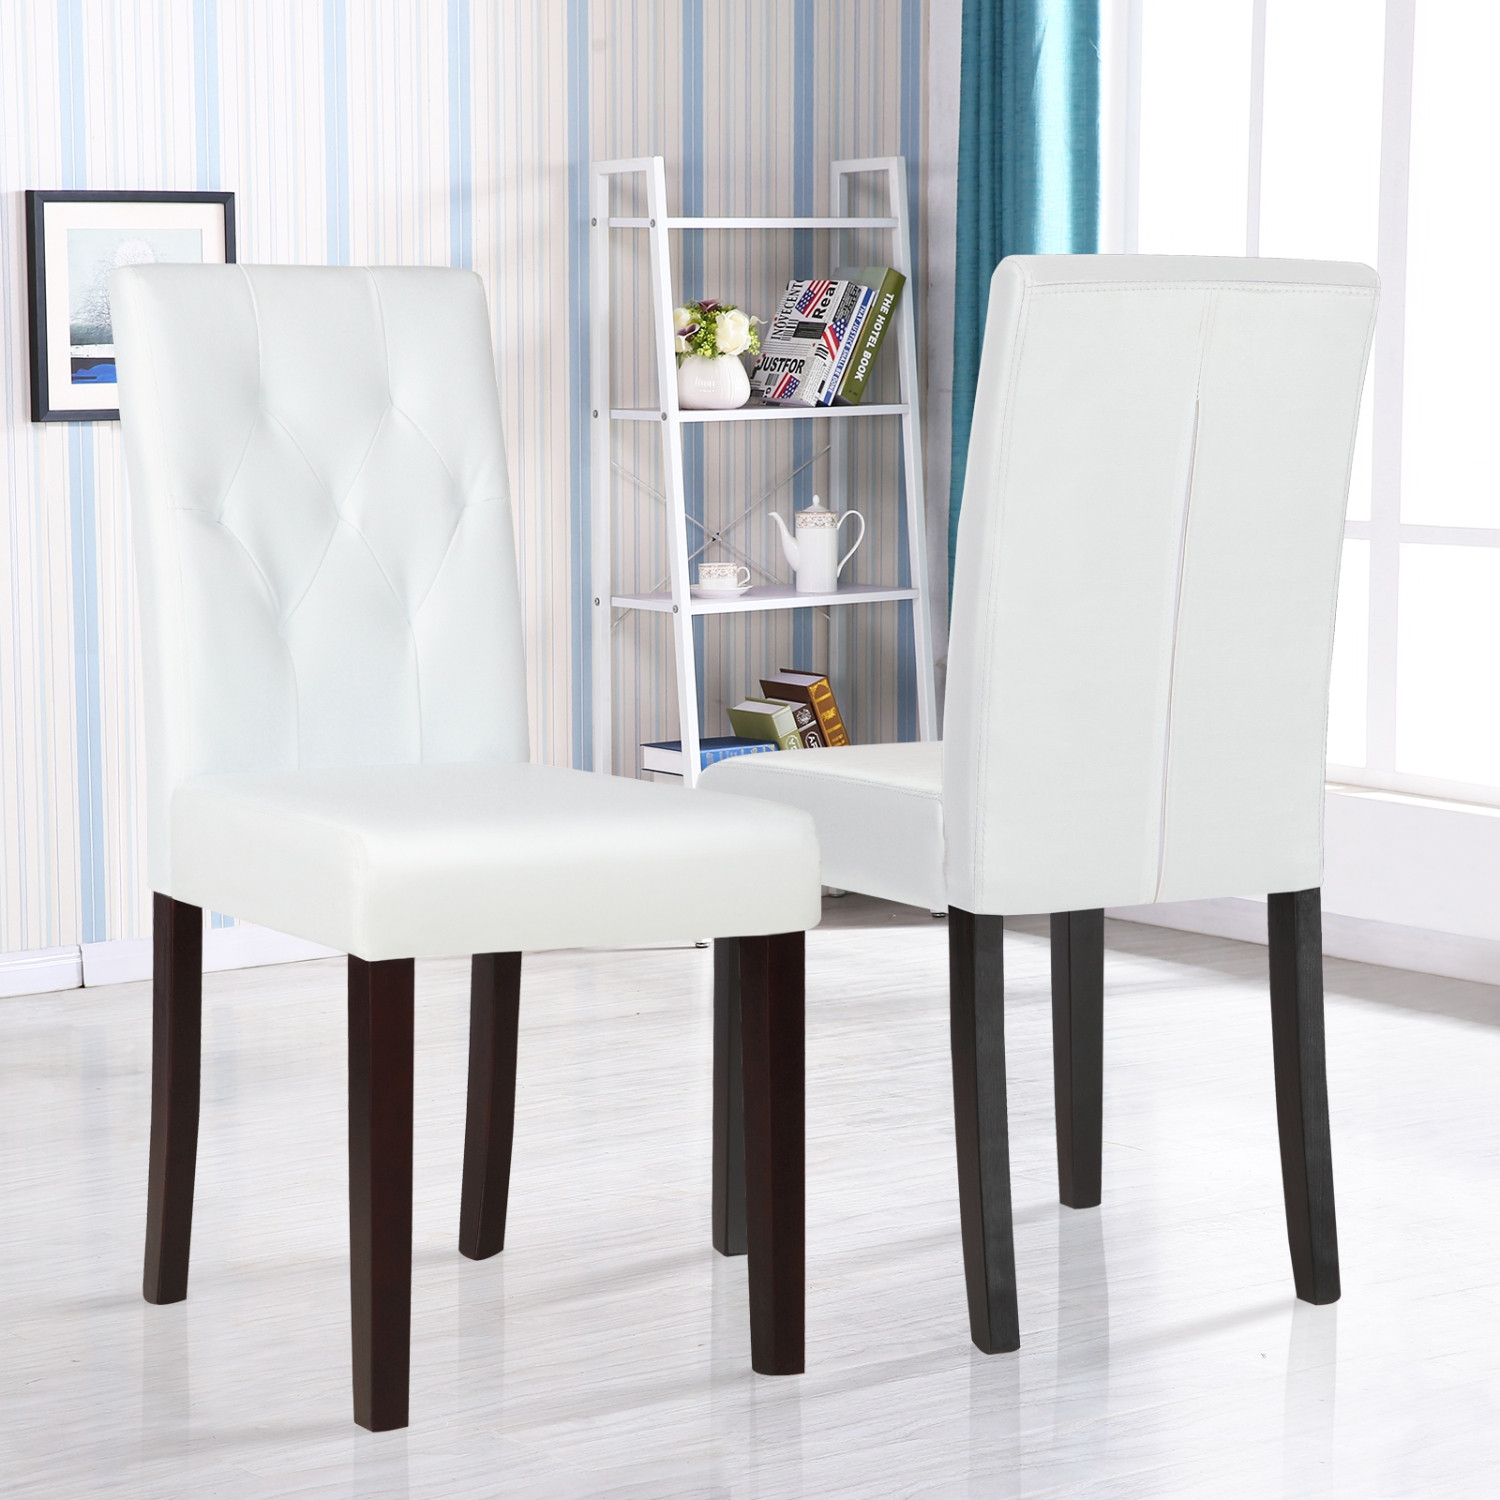 White Leather Kitchen Chairs
 Set of 2 Ivory White Leather Dining Room Chair Kitchen